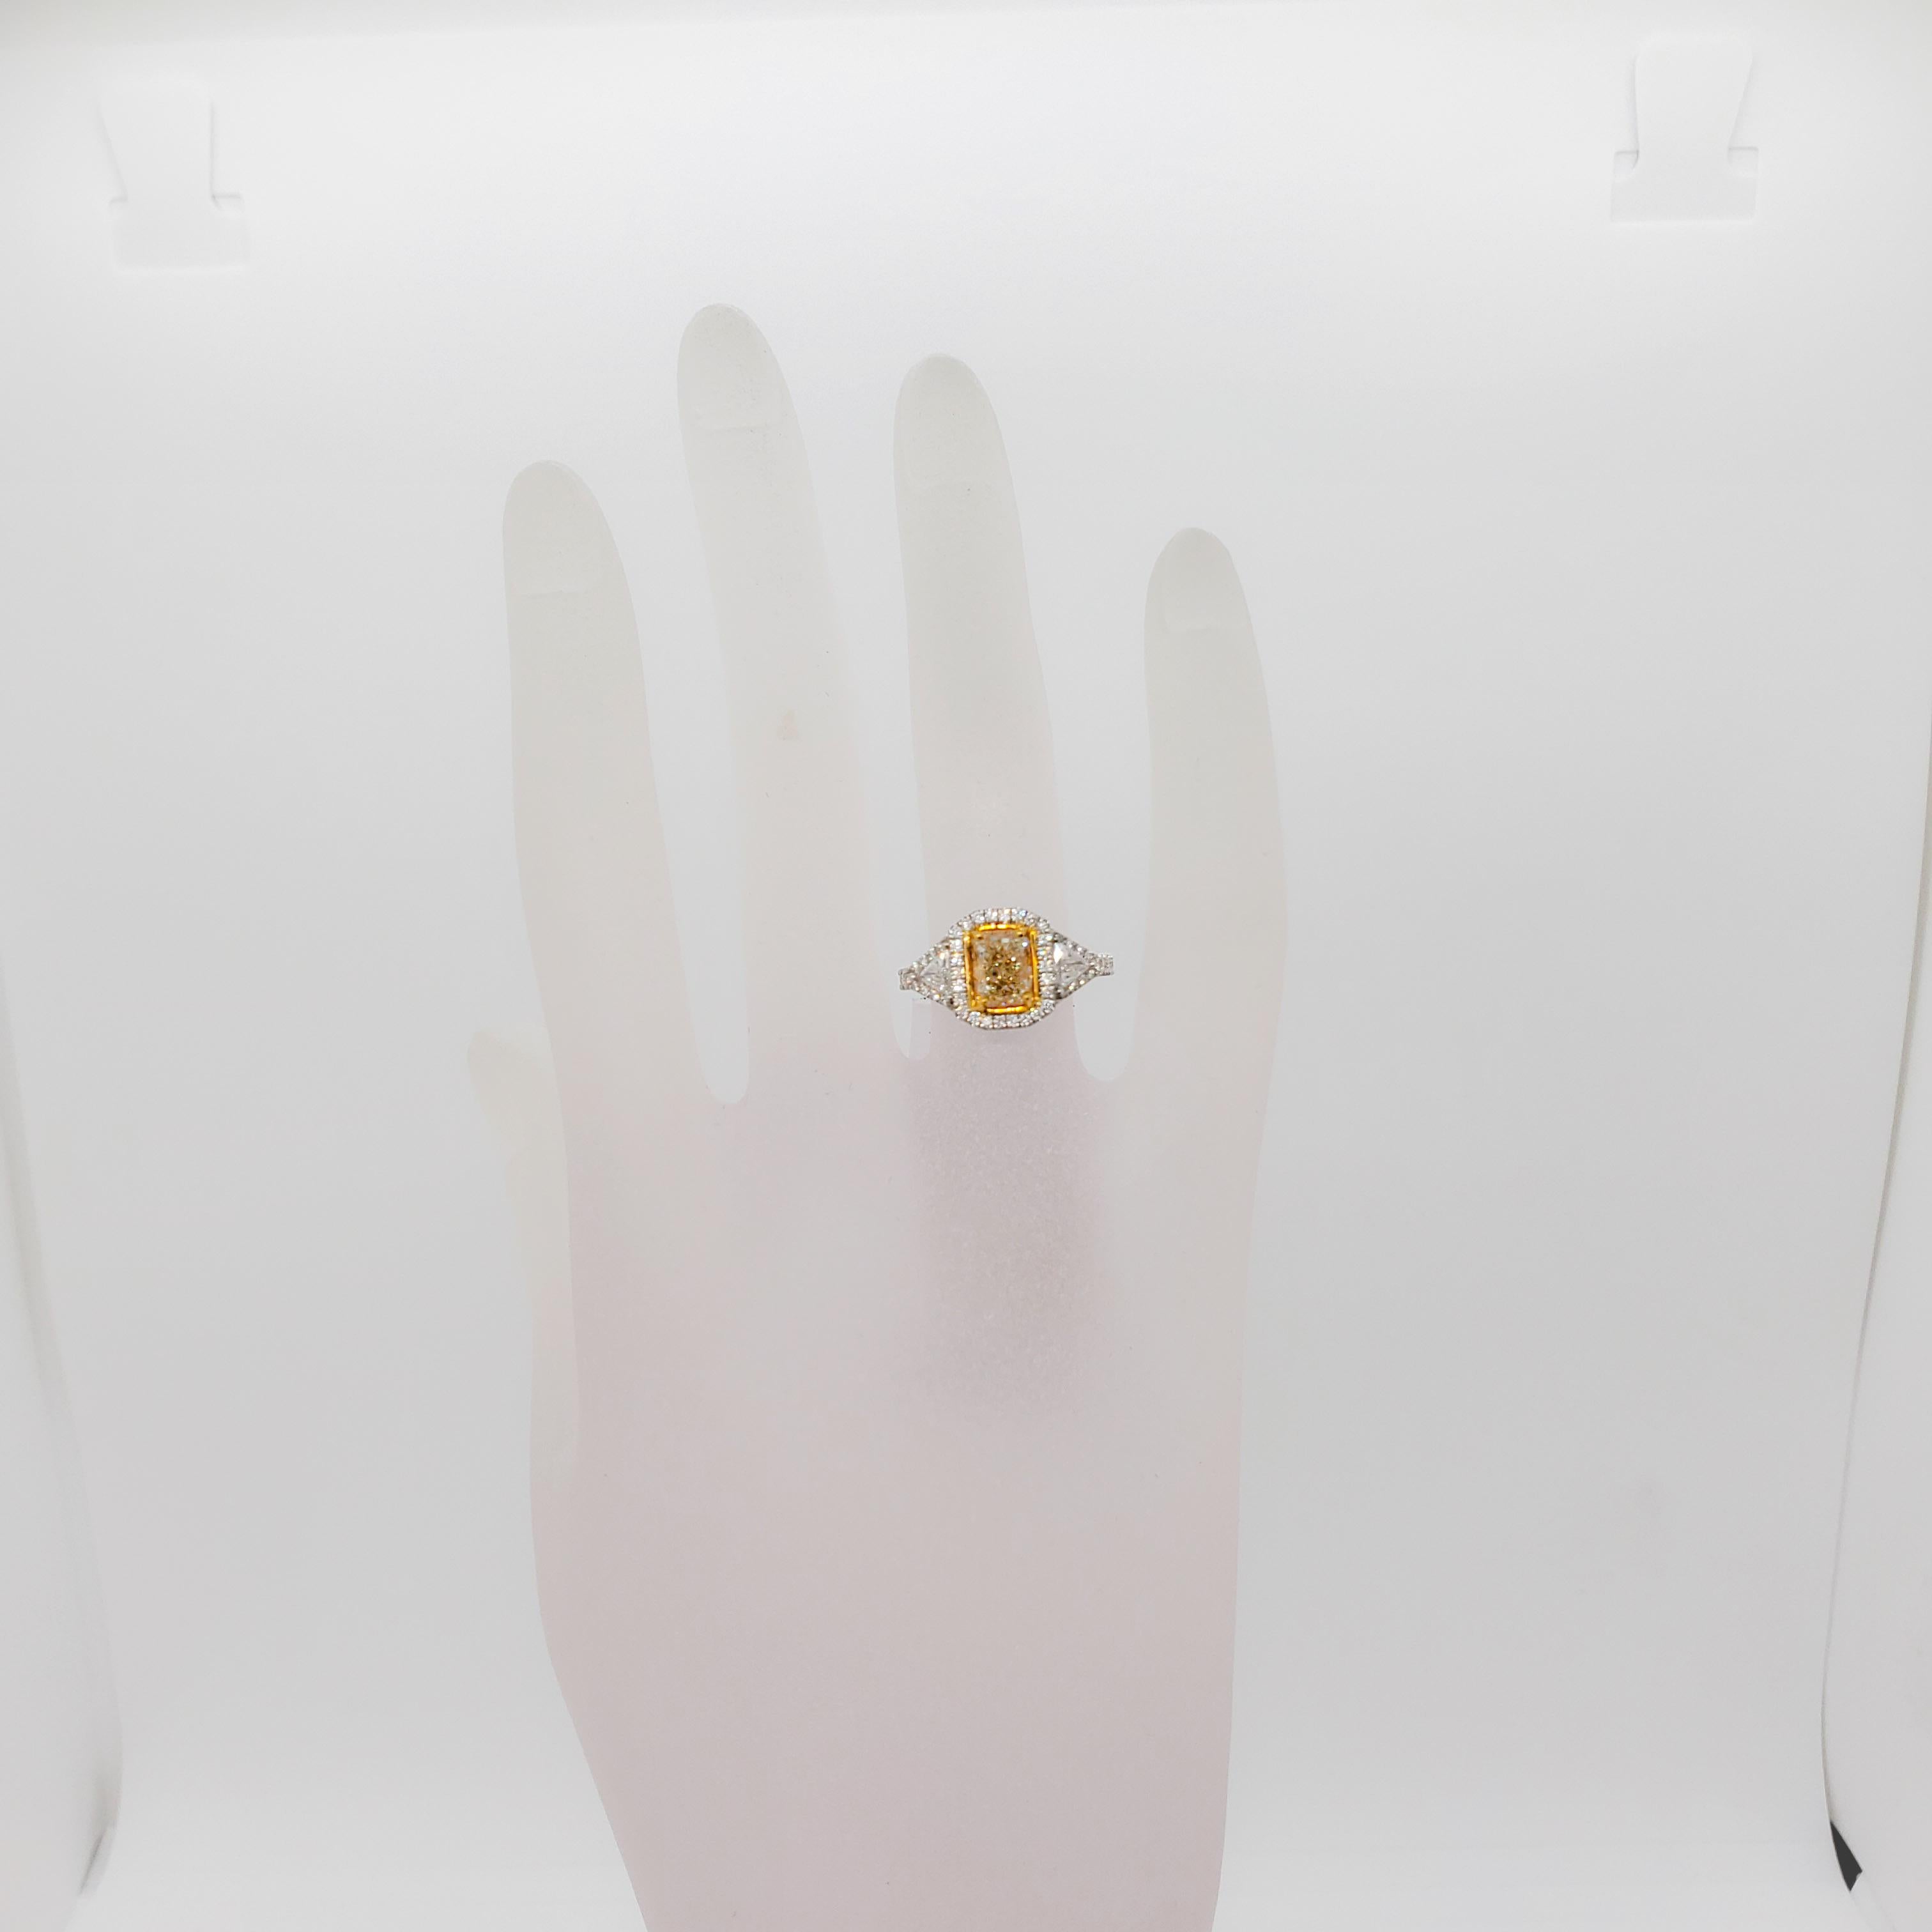 Gorgeous estate ring featuring a 1.57 ct. natural yellow diamond radiant and 0.87 ct. of good quality white, and bright diamond rounds and trillions.  Handmade 18k white and yellow gold mounting.  Ring size 6.5.  Mint condition.  